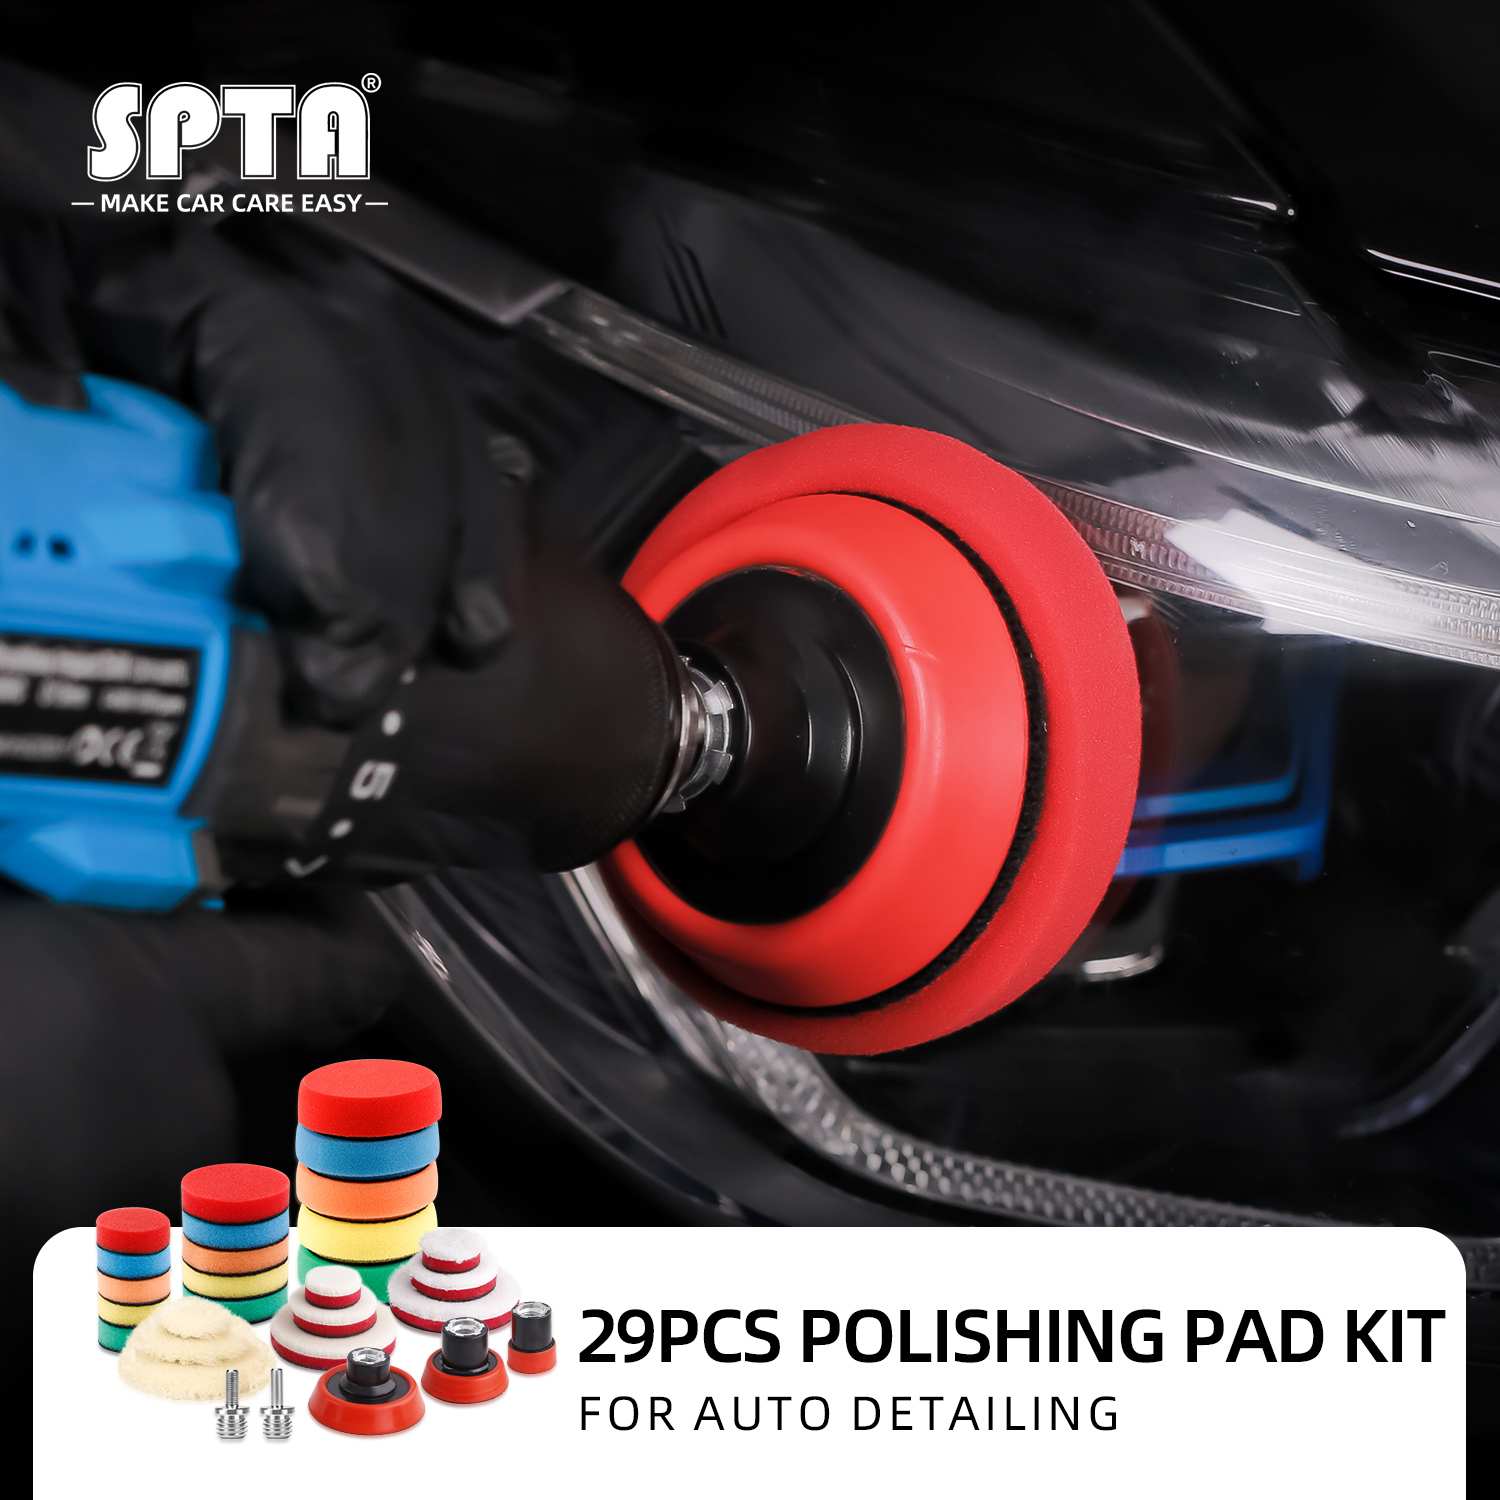 SPTA 10pcs Polishing Pads Kit, 7 Inches Large Size Buffing Pads, Car Foam Buffing Sponge Pads Kit with 5/8-11 Backing Plate for Car Care Polisher